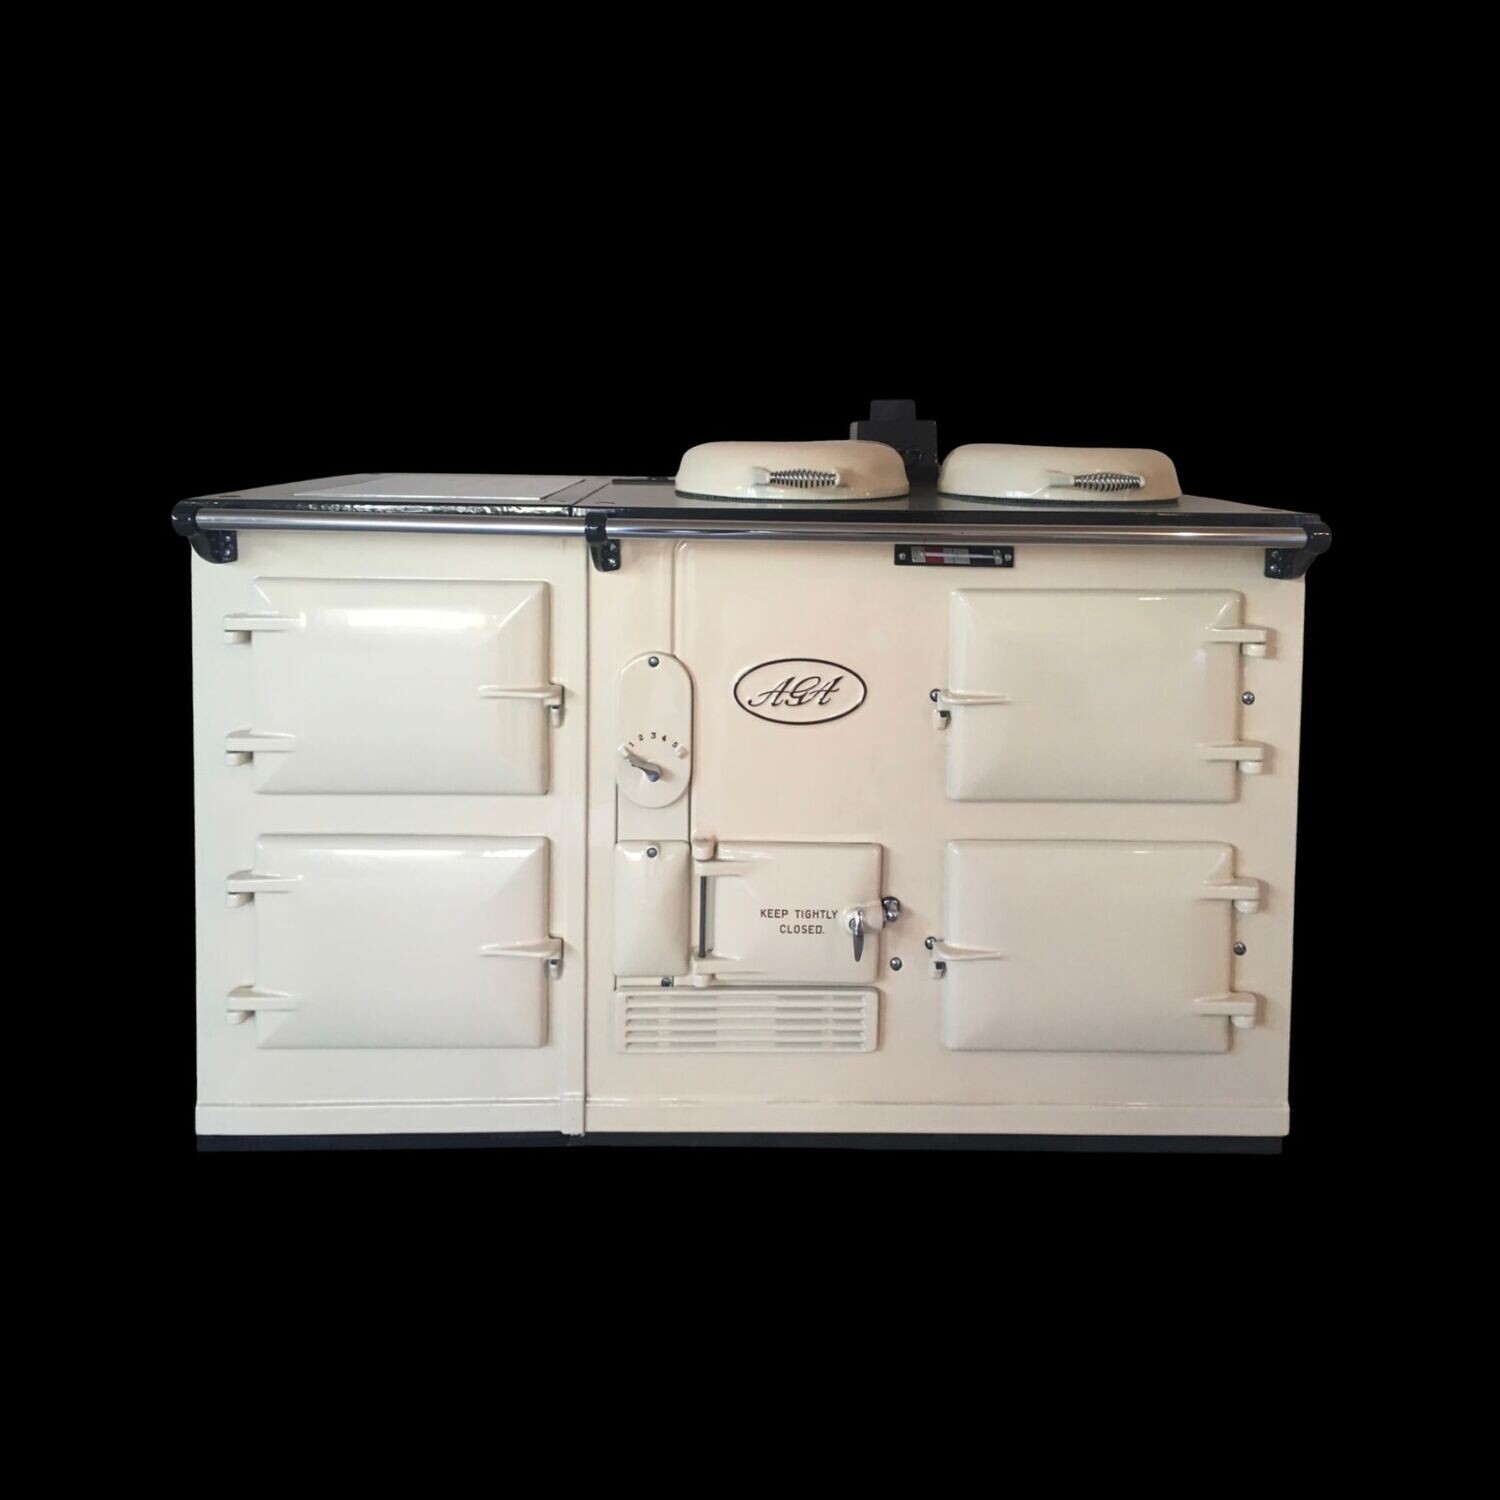 Reconditioned 4 Oven Electrickit Aga Cooker (Trad Model, Any Colour)